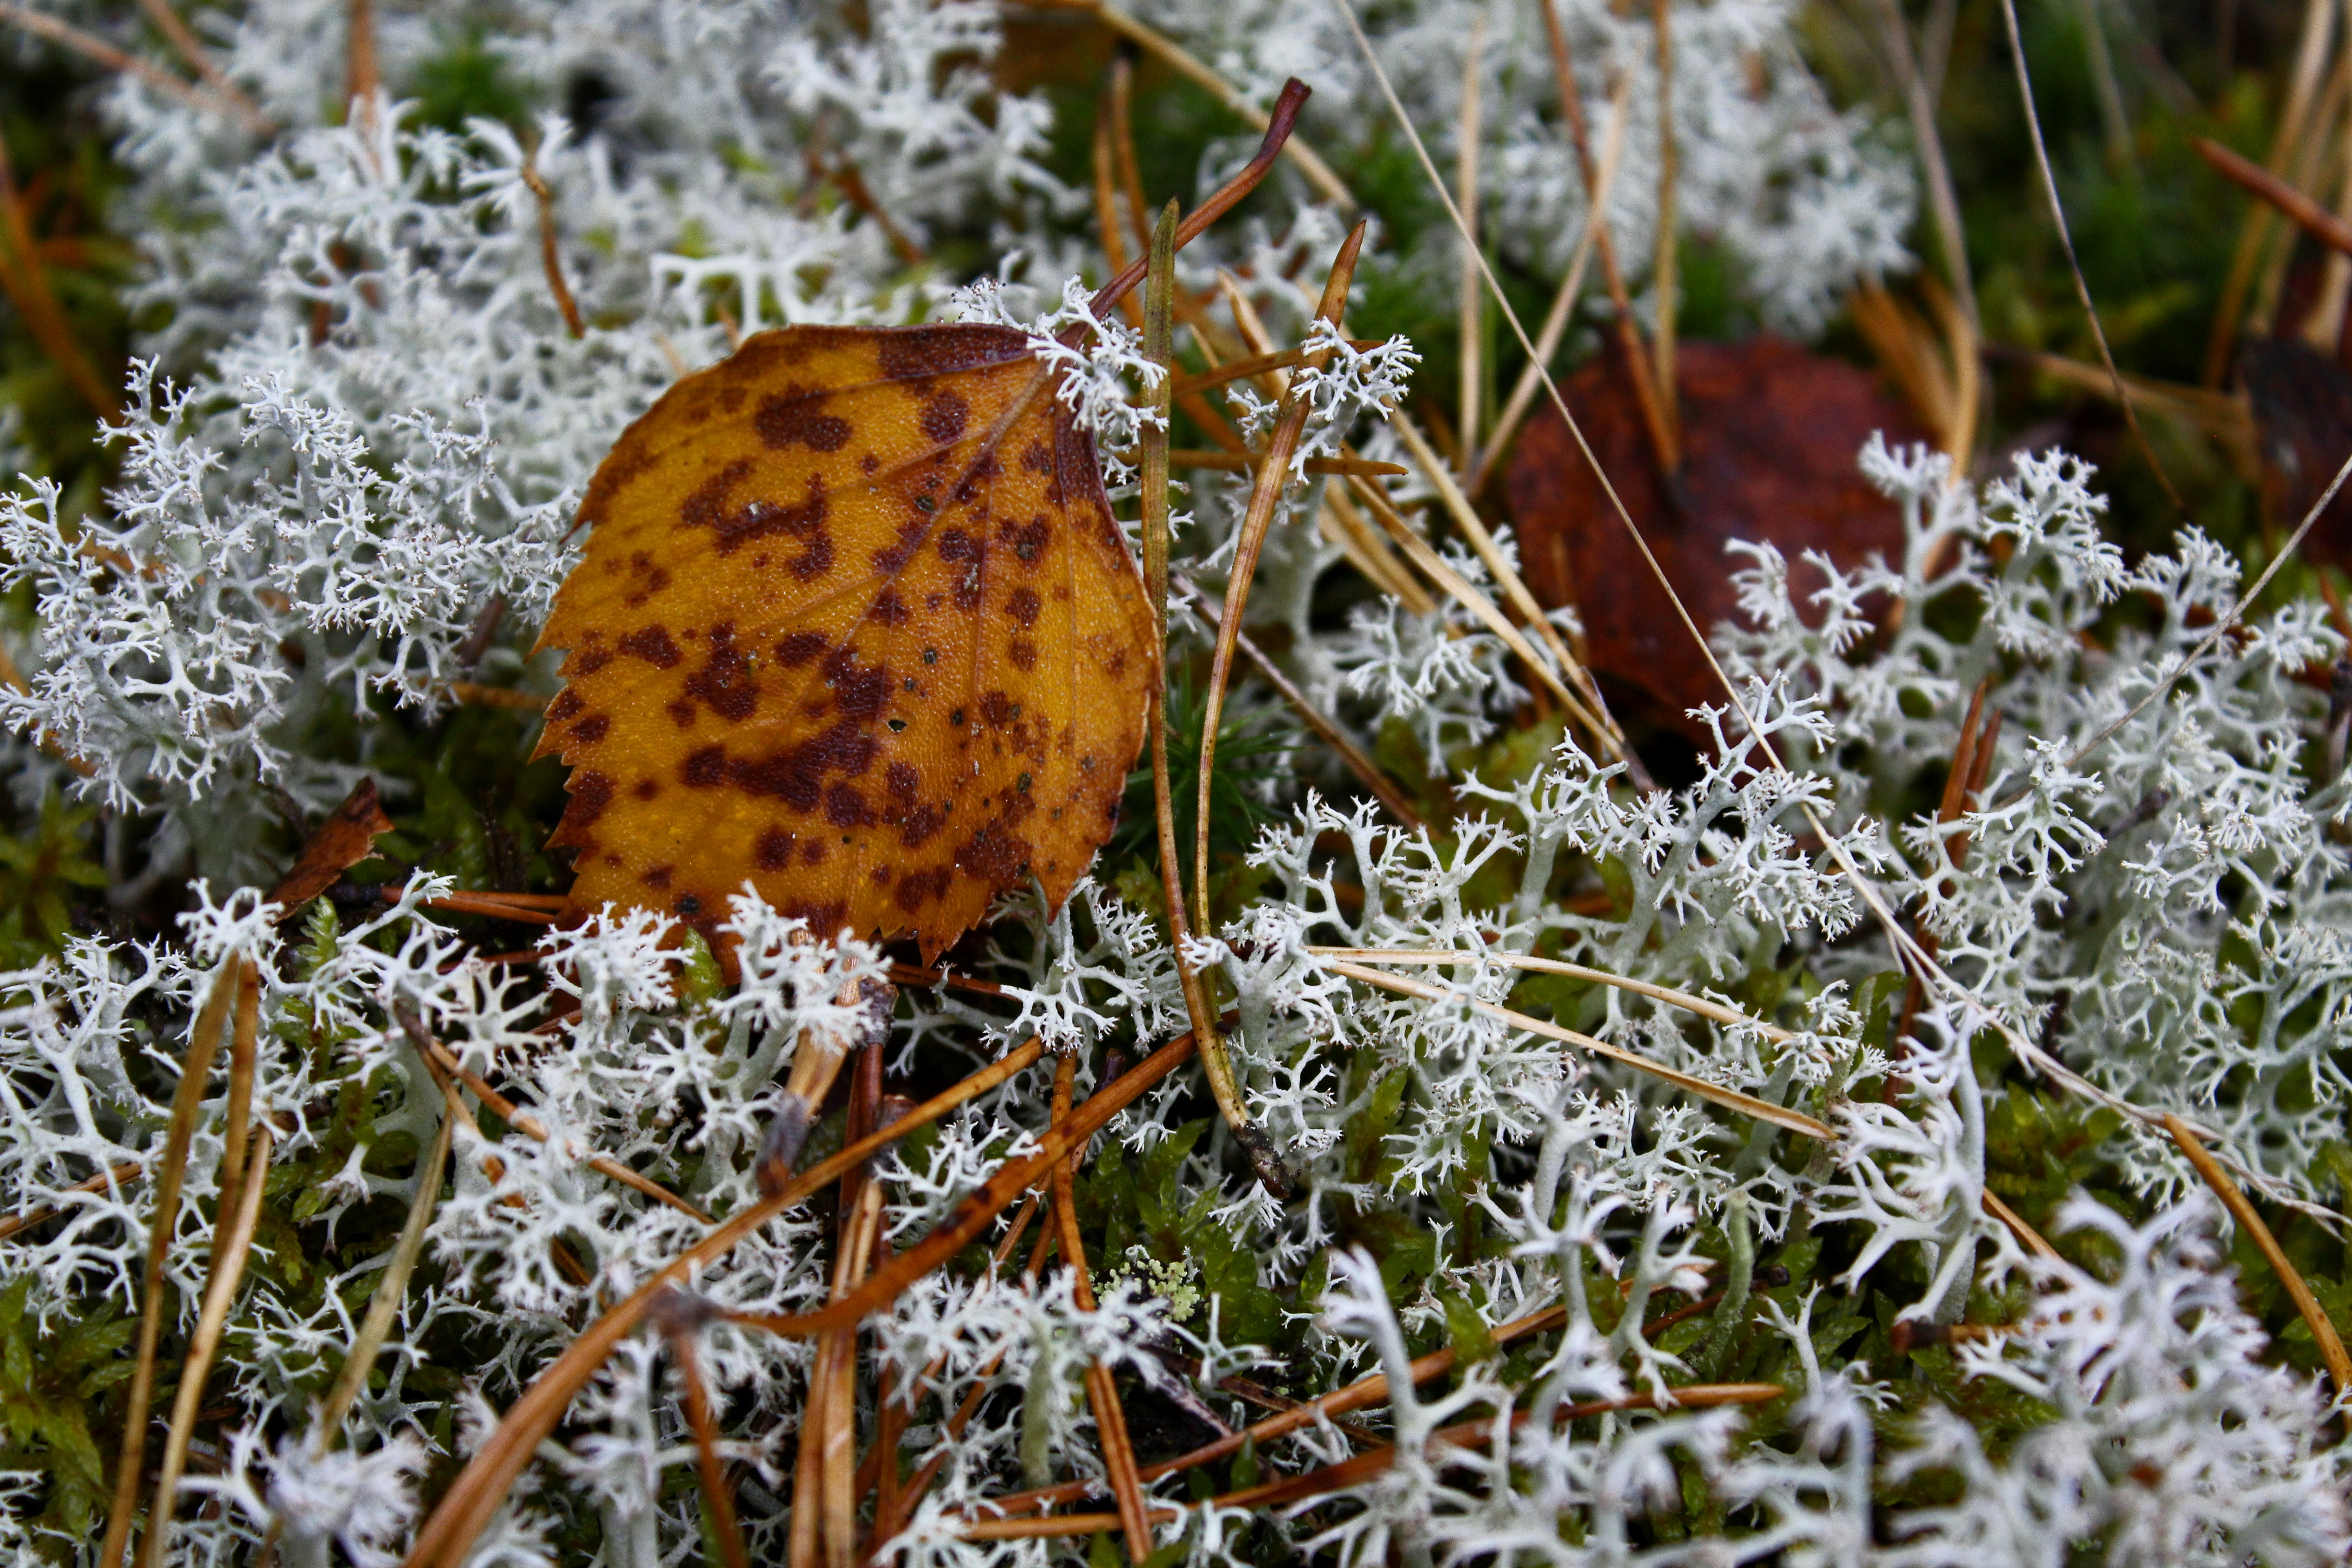 Forest ground close up with lichen, pine needles and a rusty birch leaf.